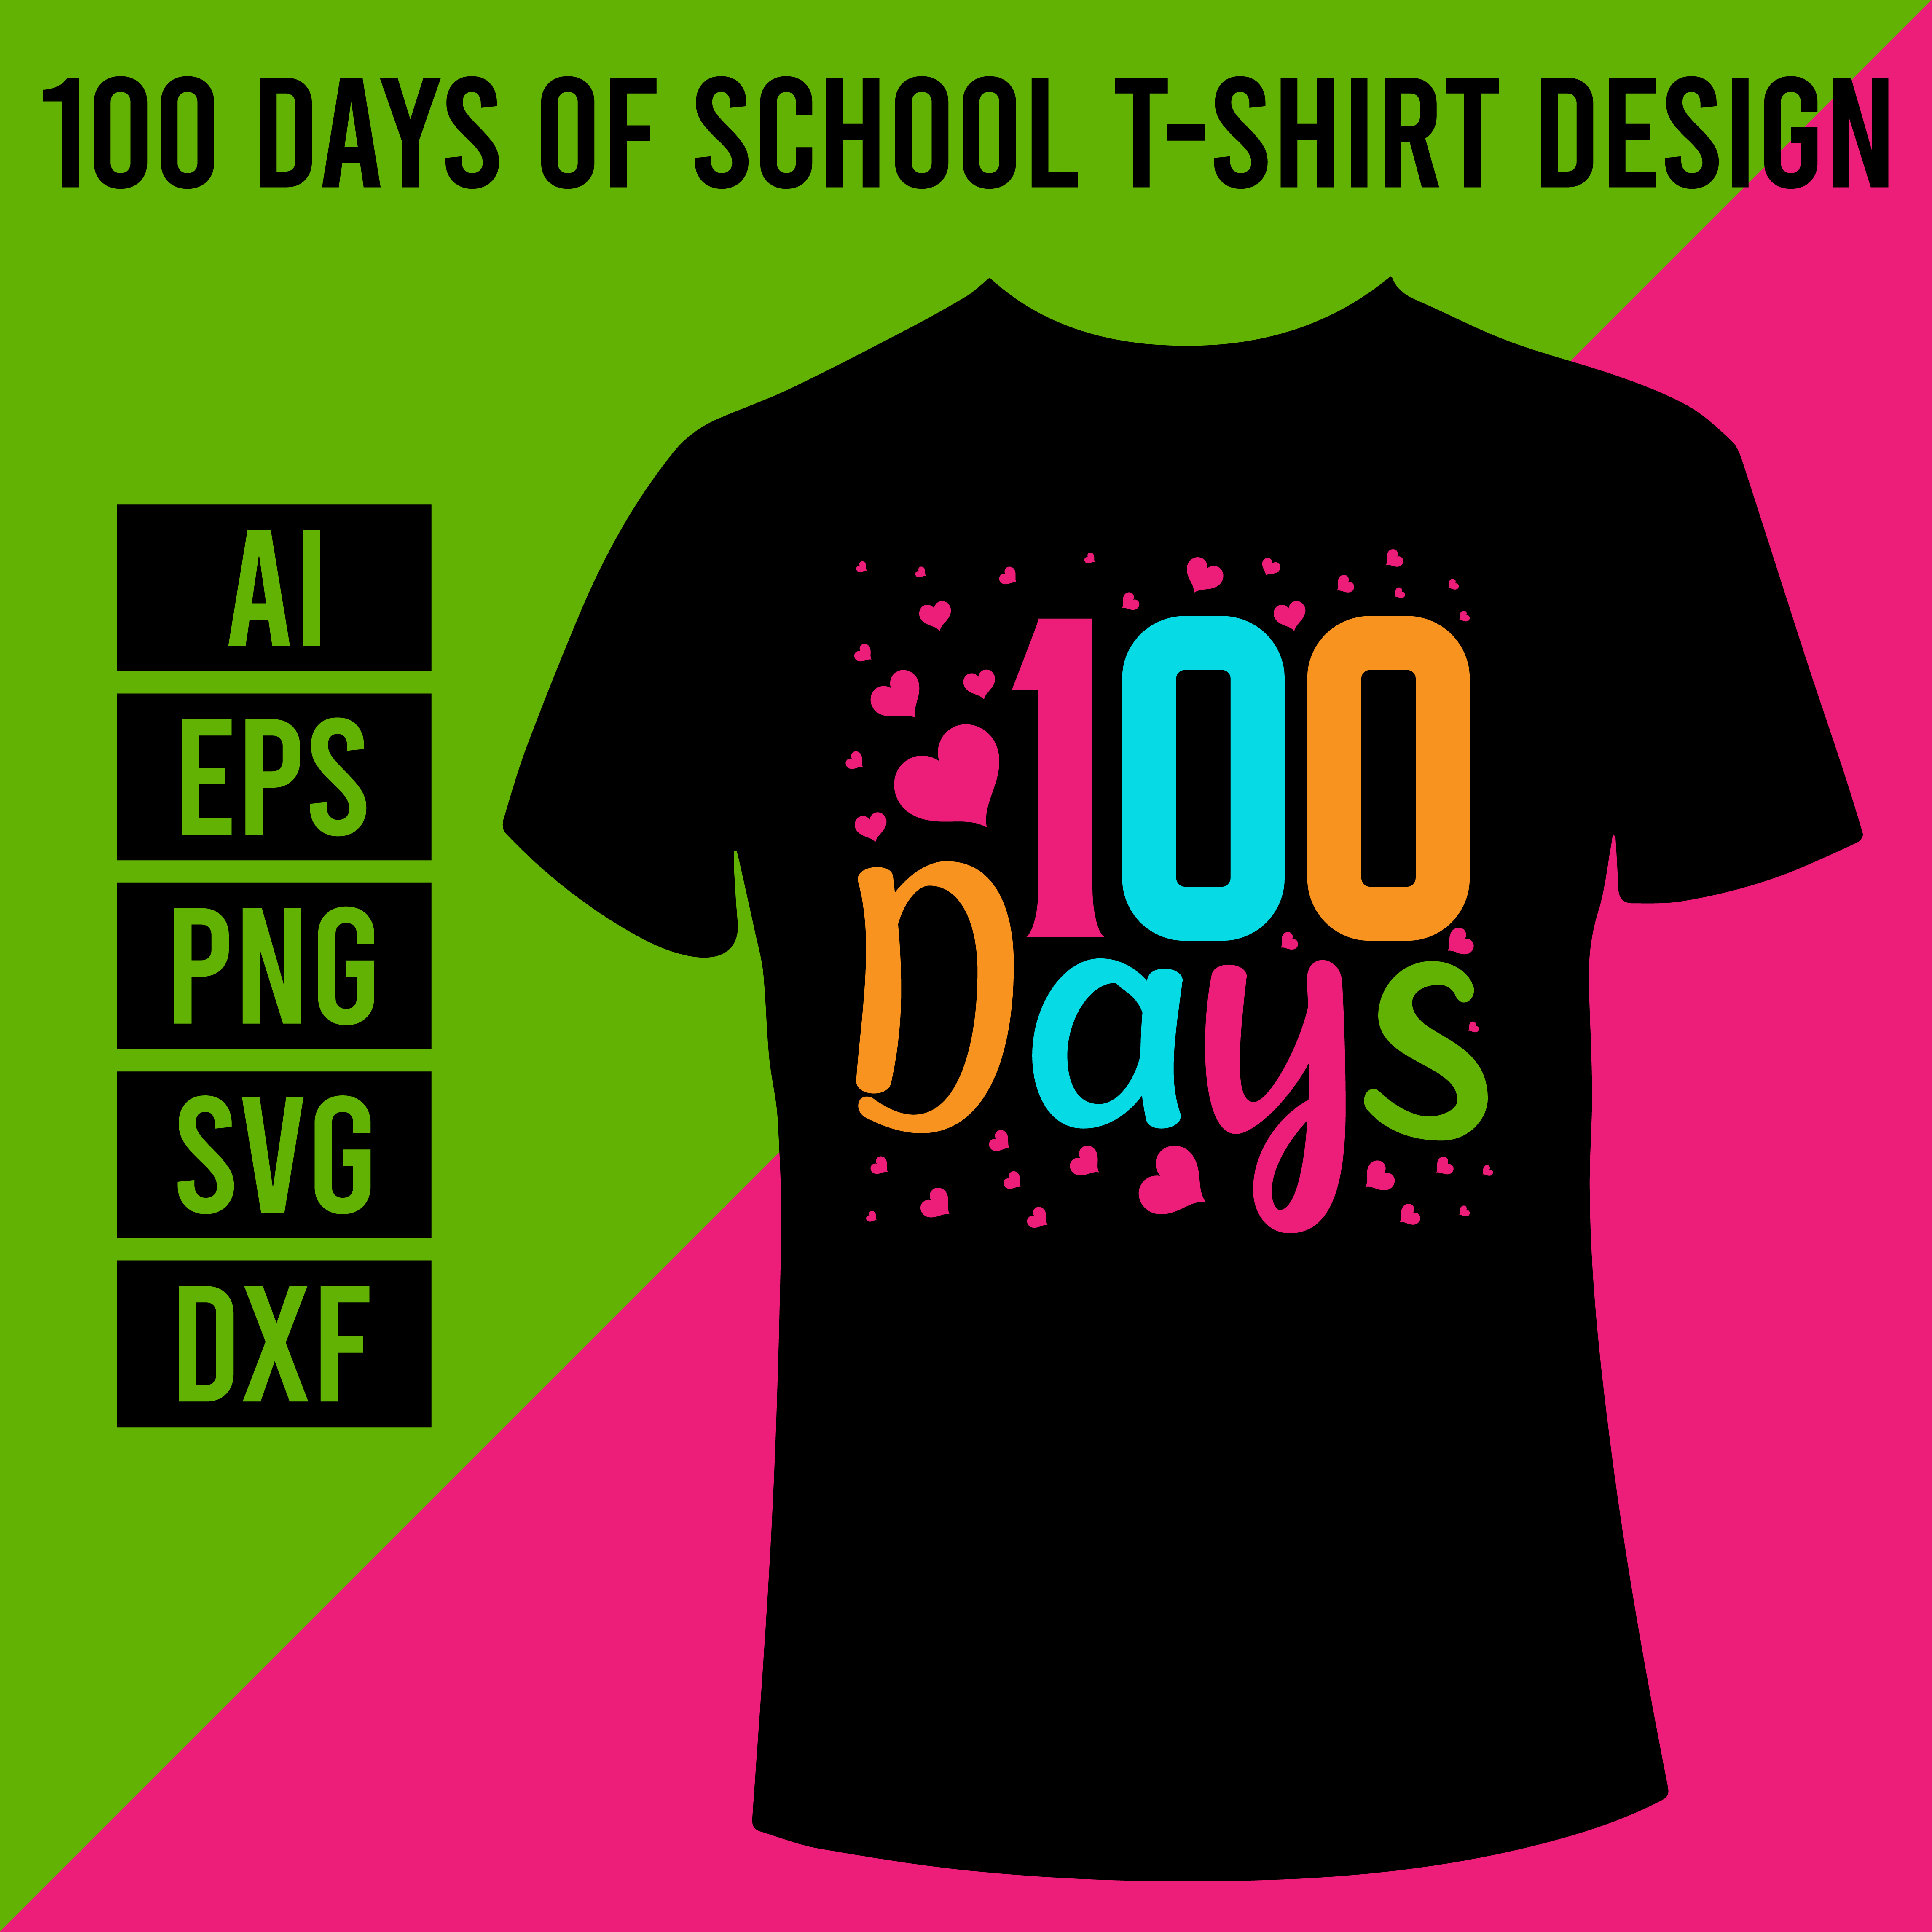 100 Days of School T-Shirt Design cover image.